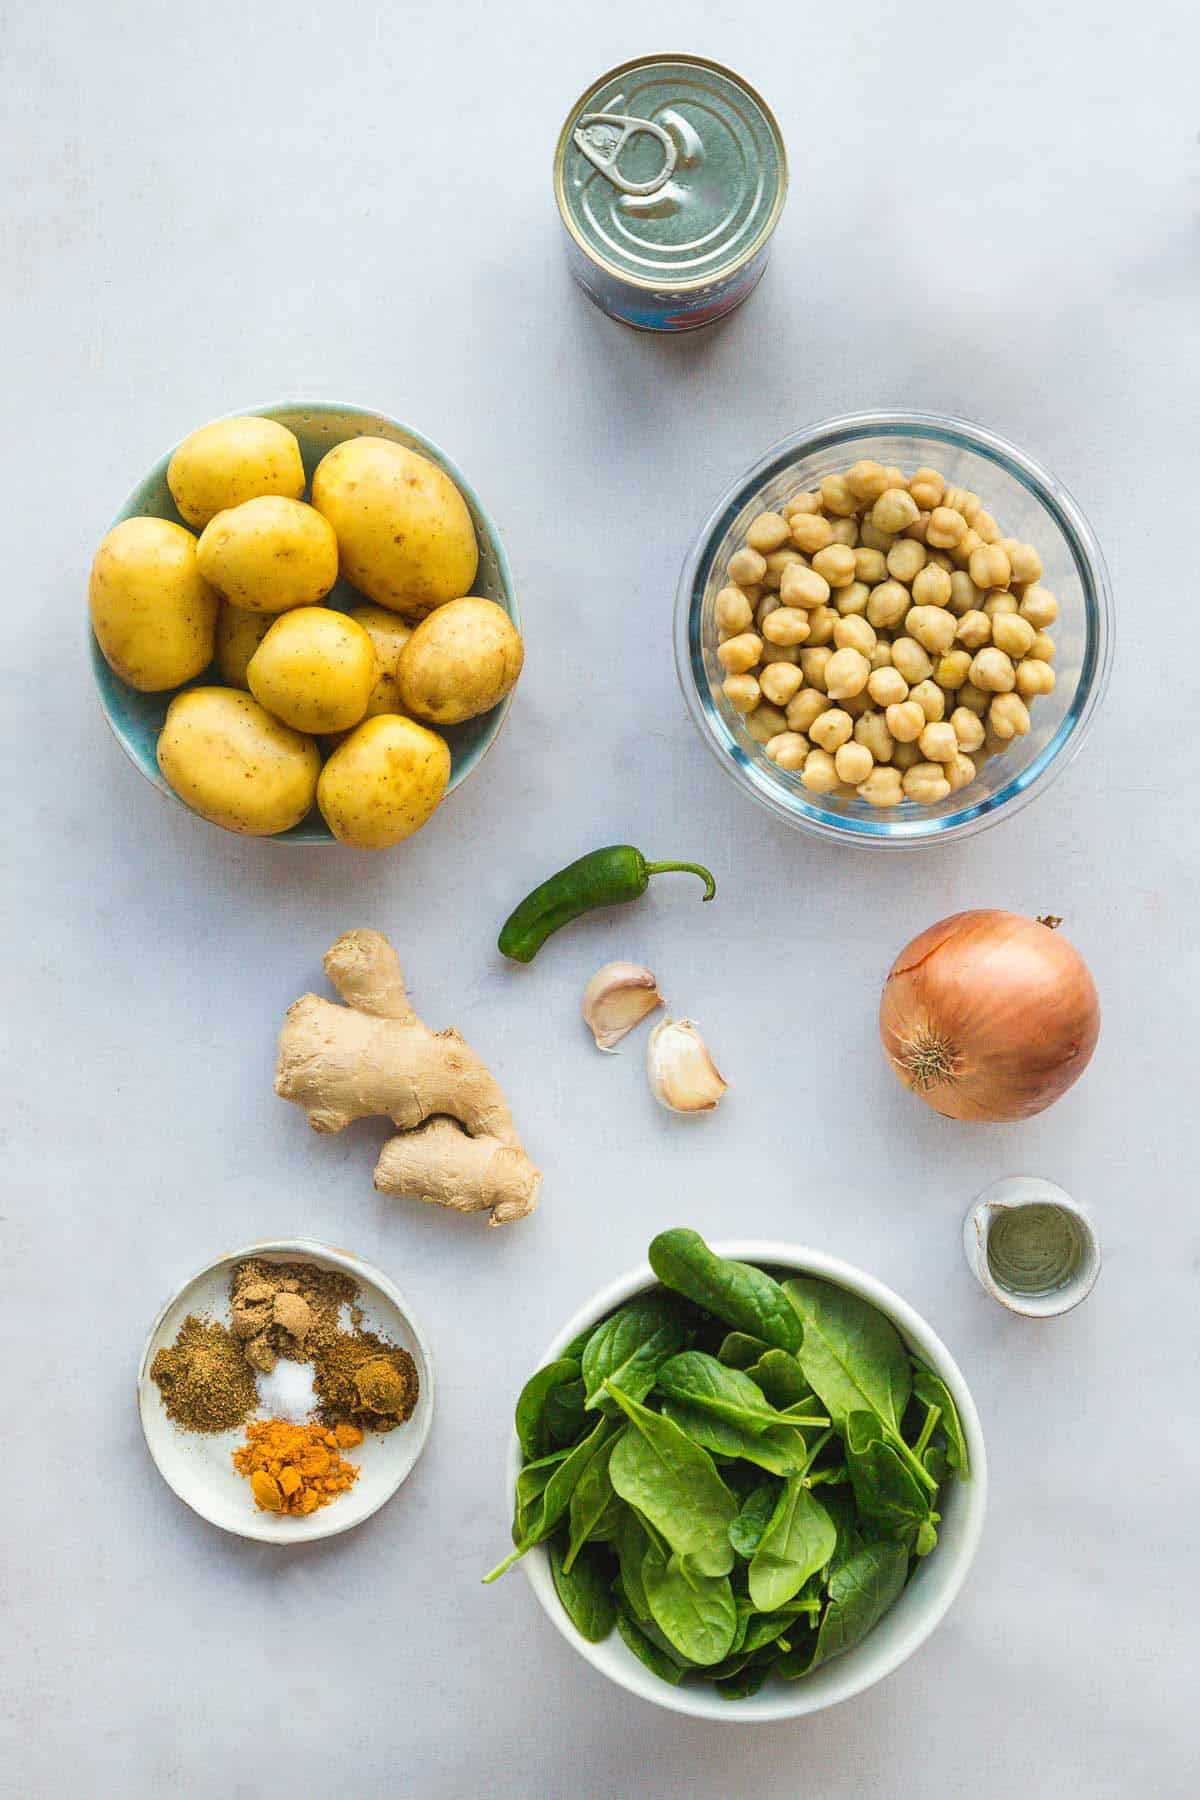 Chickpea and potato curry ingredients